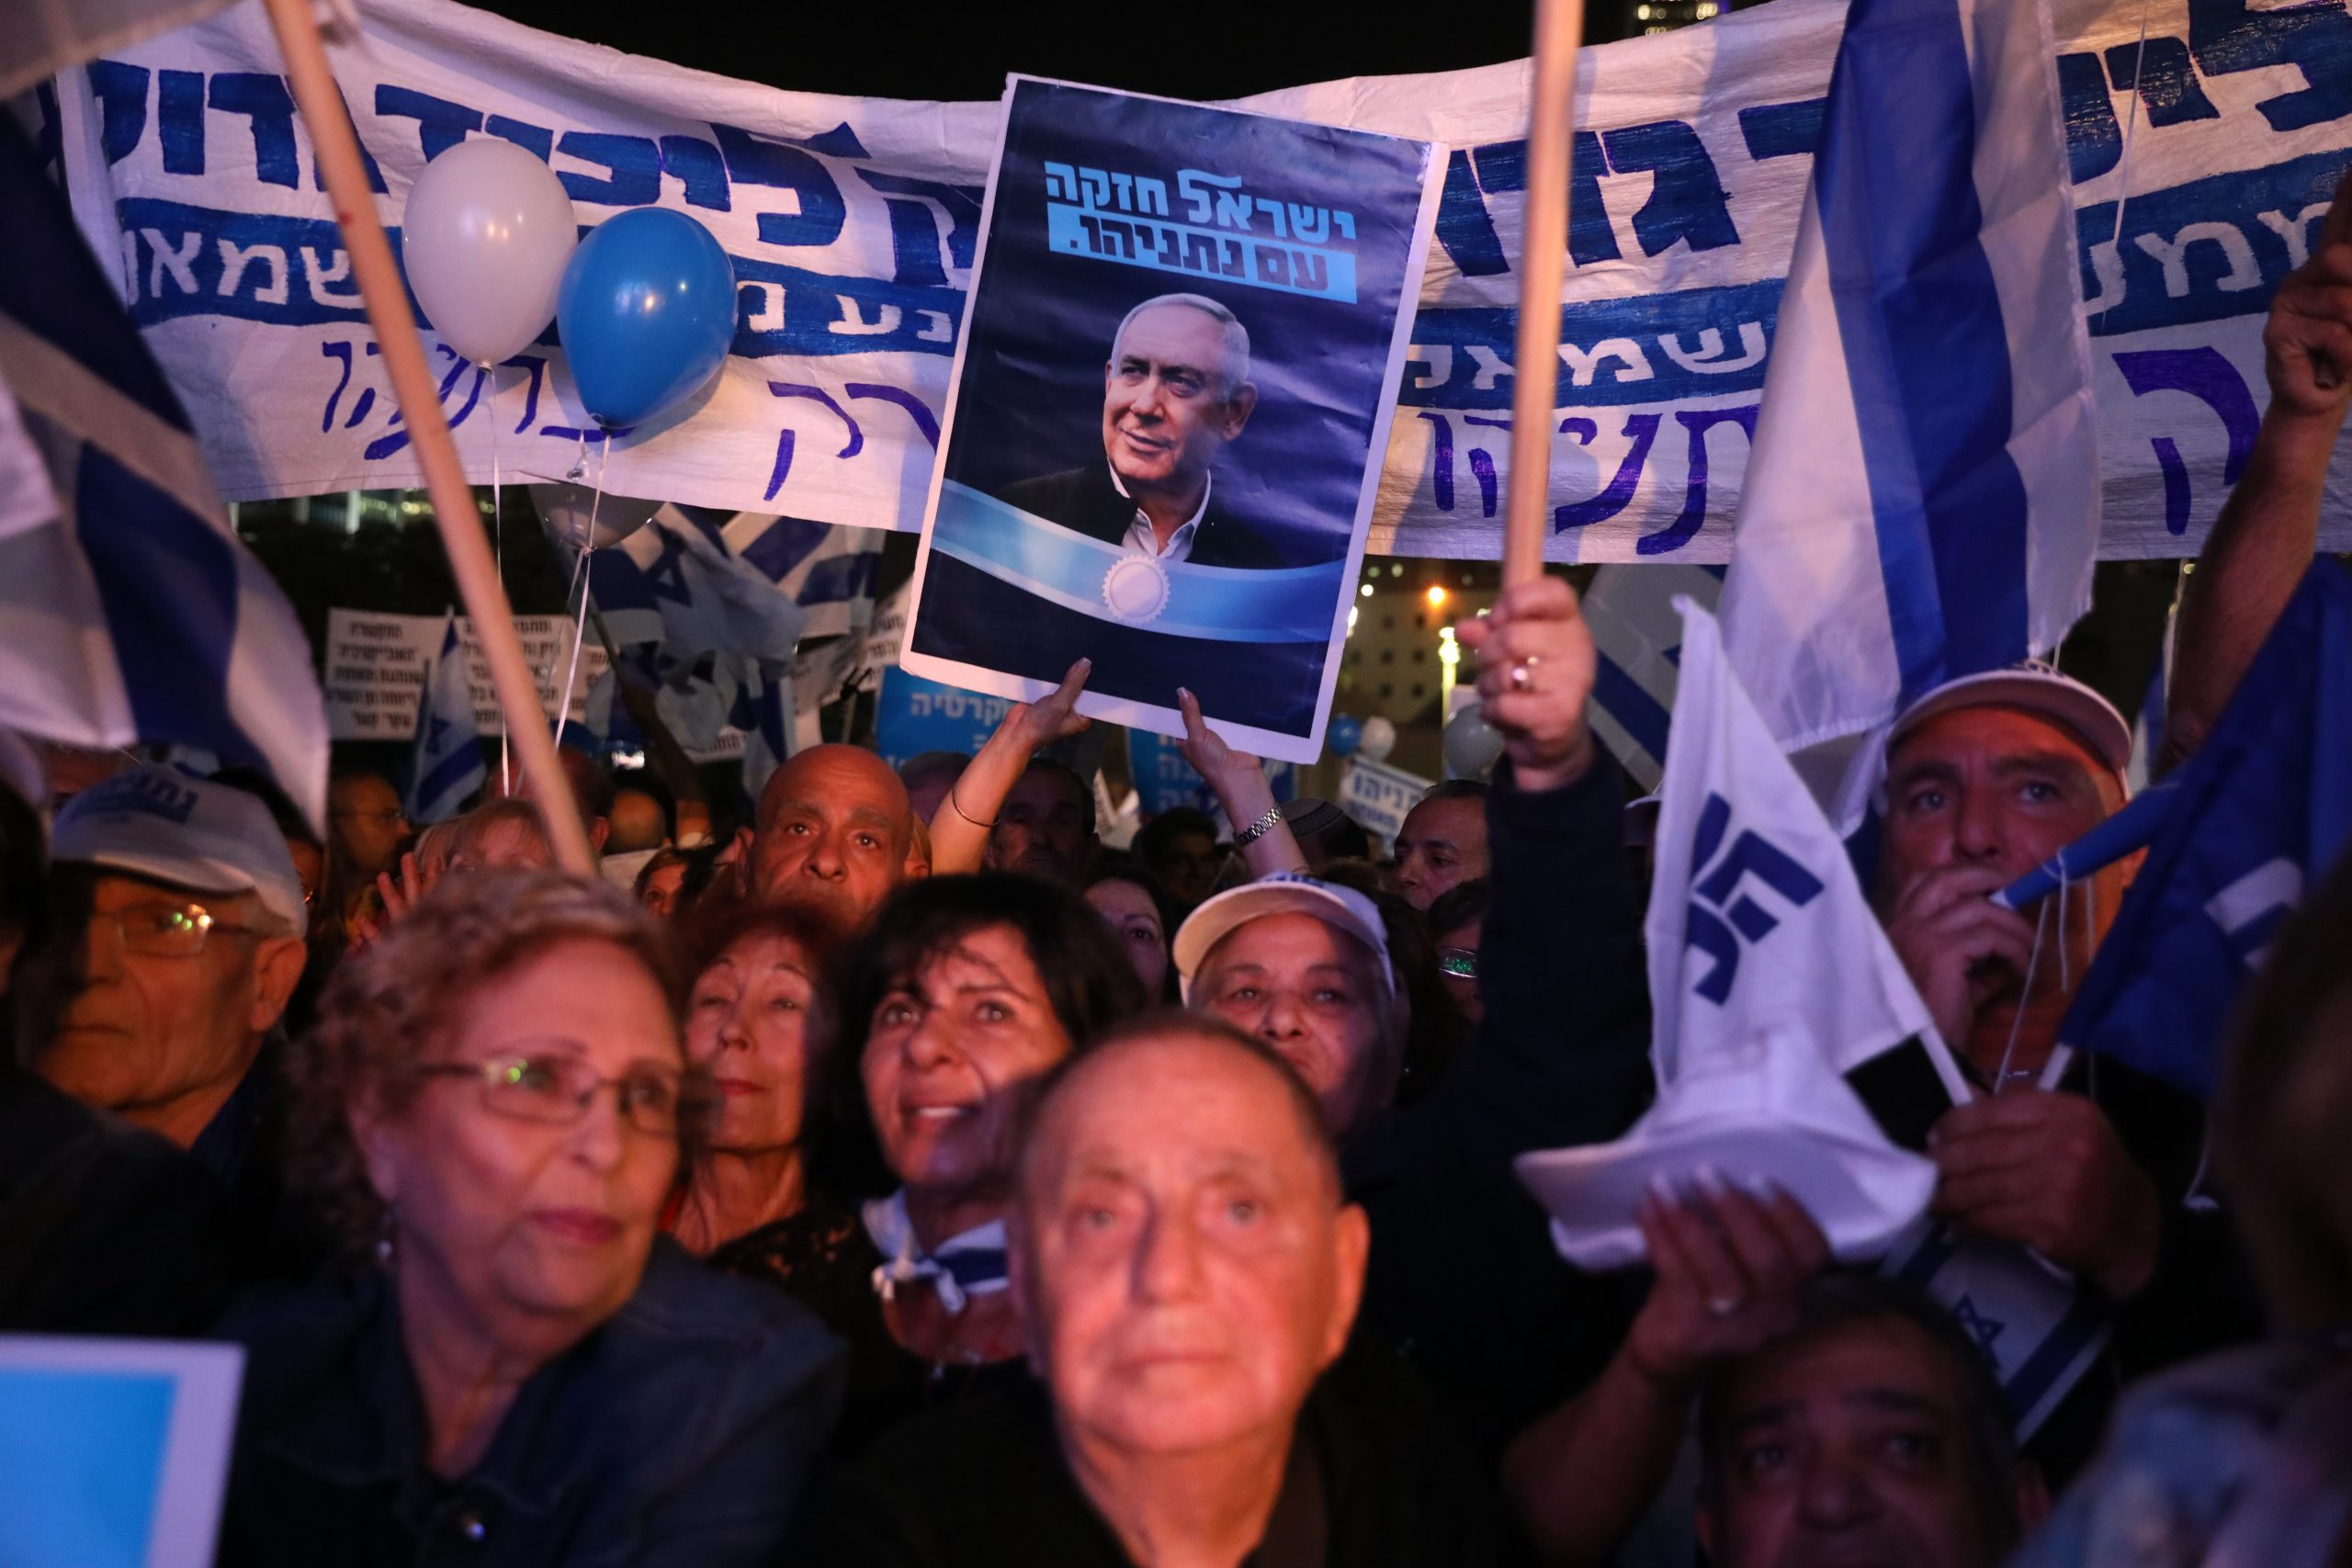 epa08027393 Supporters of Israeli Prime minister Benjamin Netanyahu protest against Attorney General Avichai Mandelblit's decision to charge Netanyahu in Tel Aviv, Israel, 26 November 2019. Reports on 21 November 2019 state Israeli Prime Minister Benjamin Netanyahu has officially been charged by the attorney general in a number of corruption scandals. Netanyahu was charged with bribery, breach of trust and fraud.  EPA/ABIR SULTAN